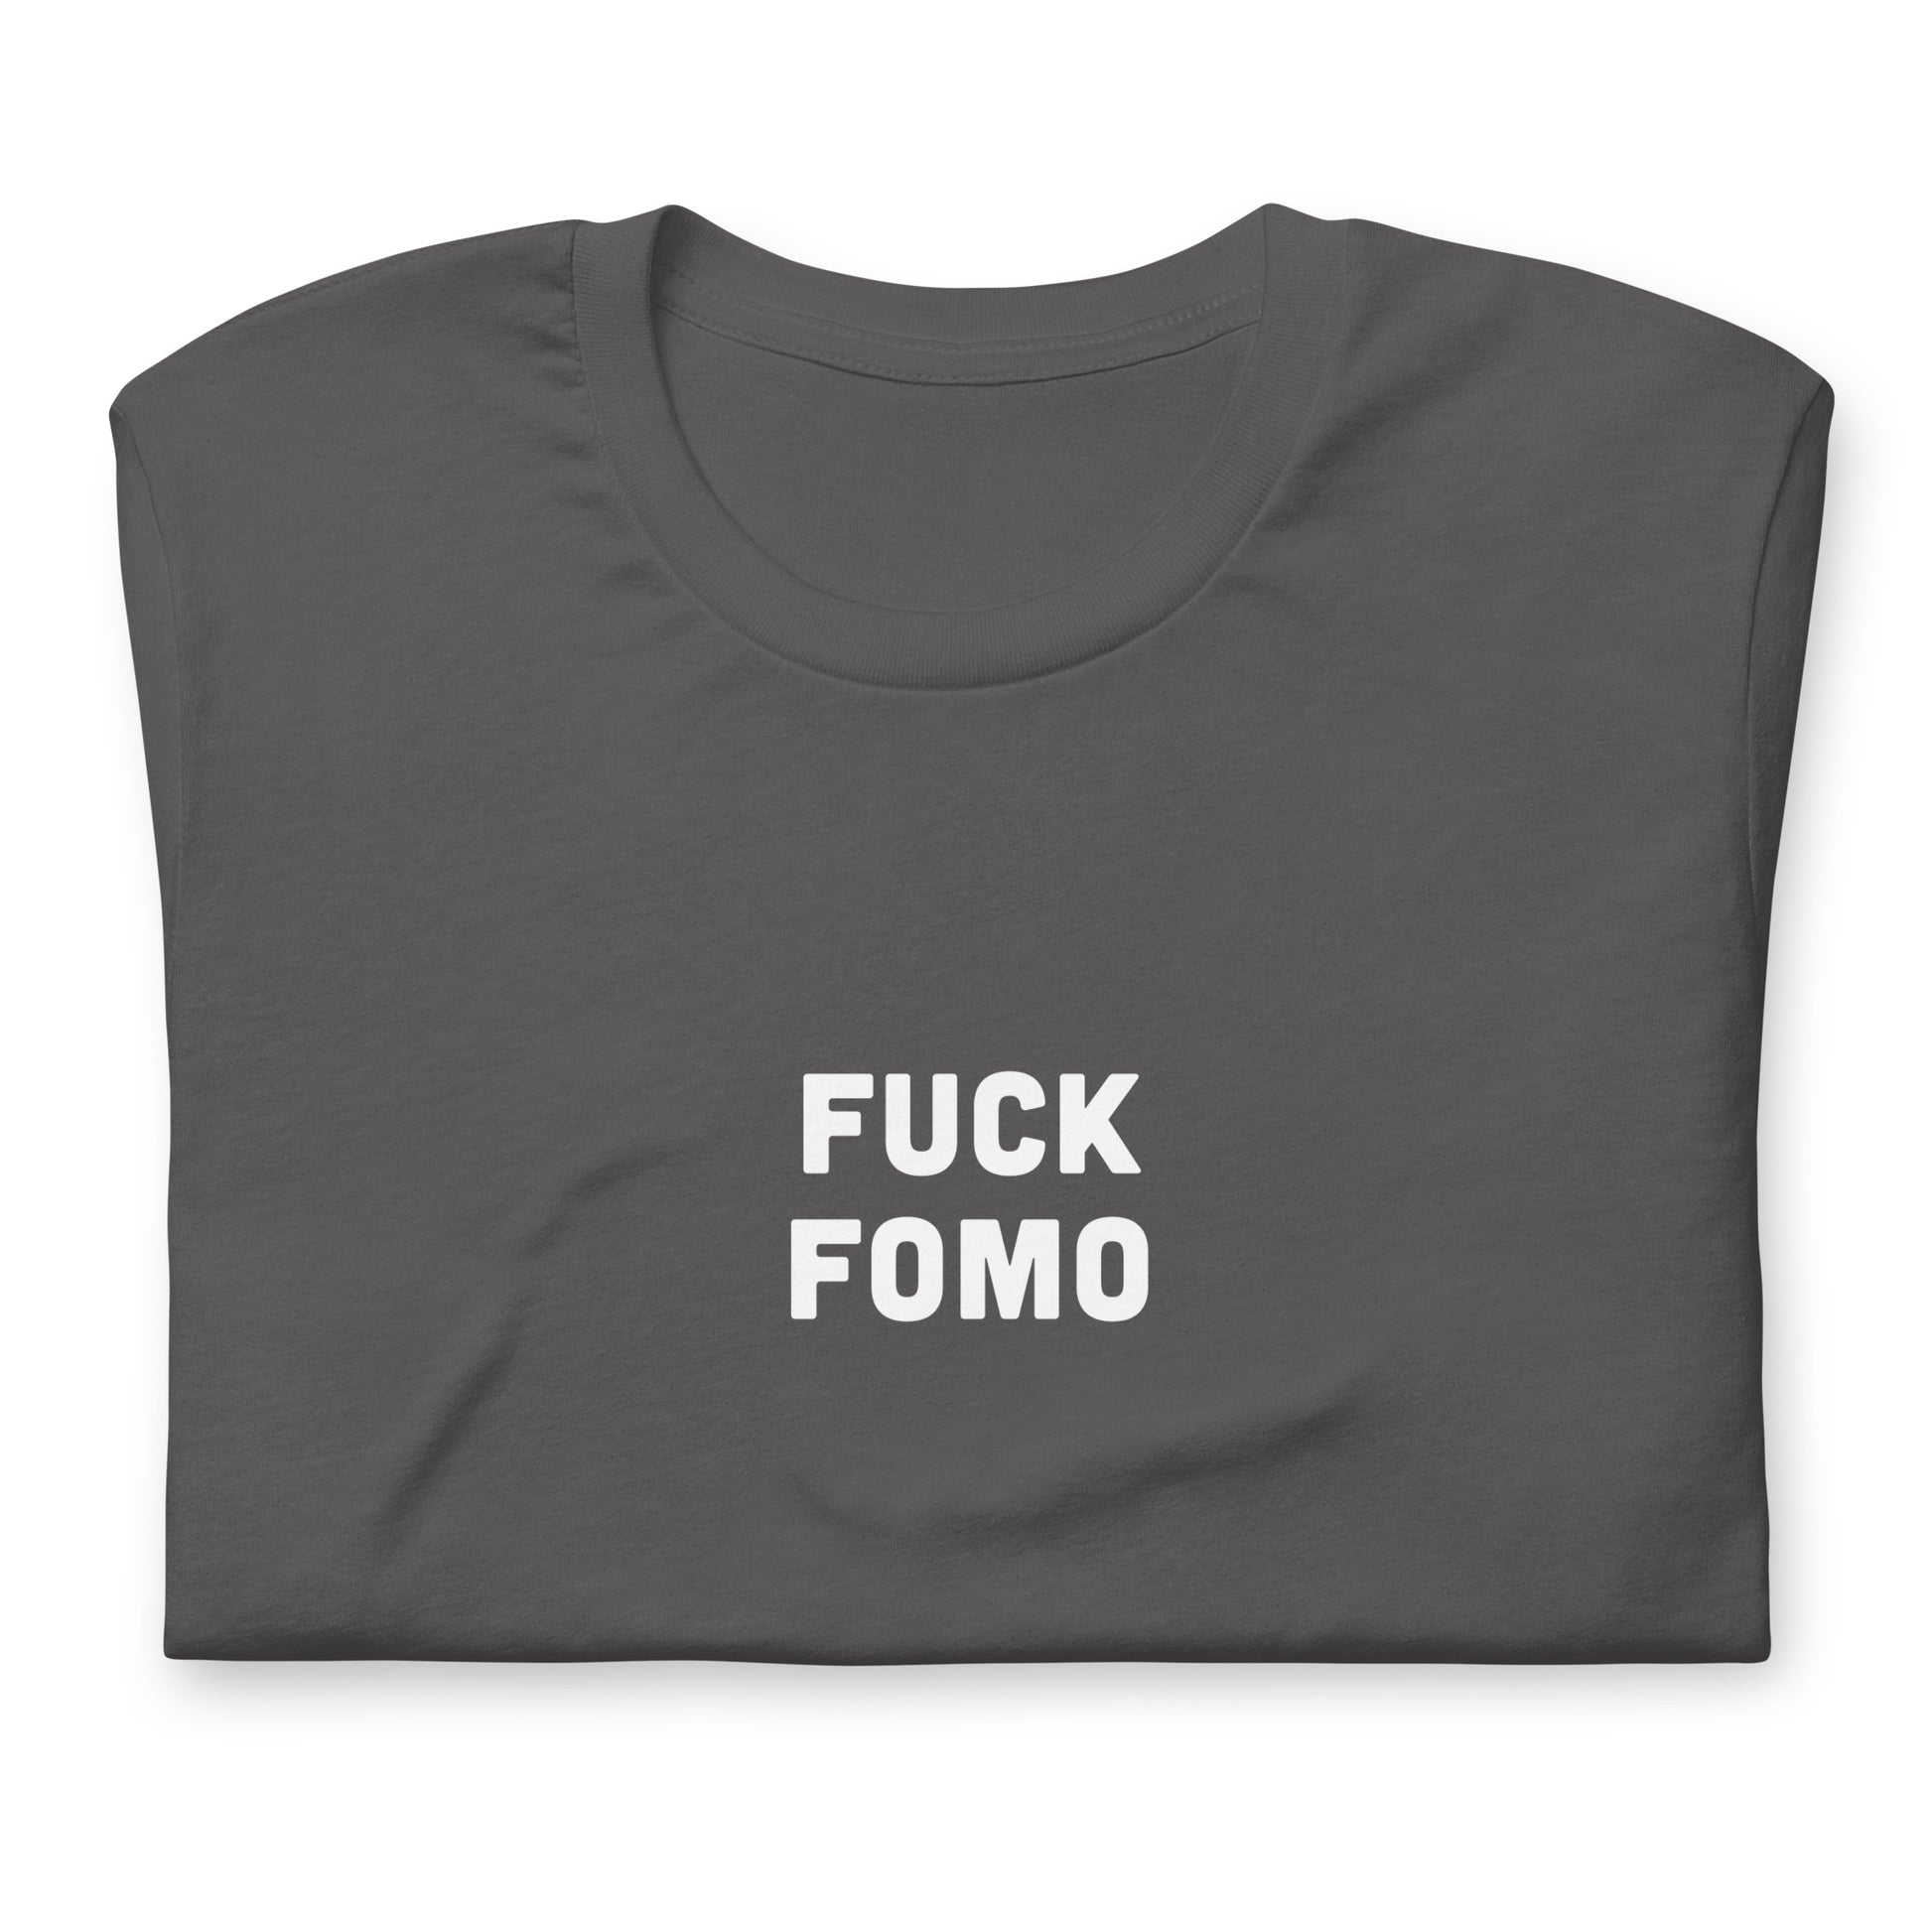 Fuck Fomo T-Shirt Size S Color Navy